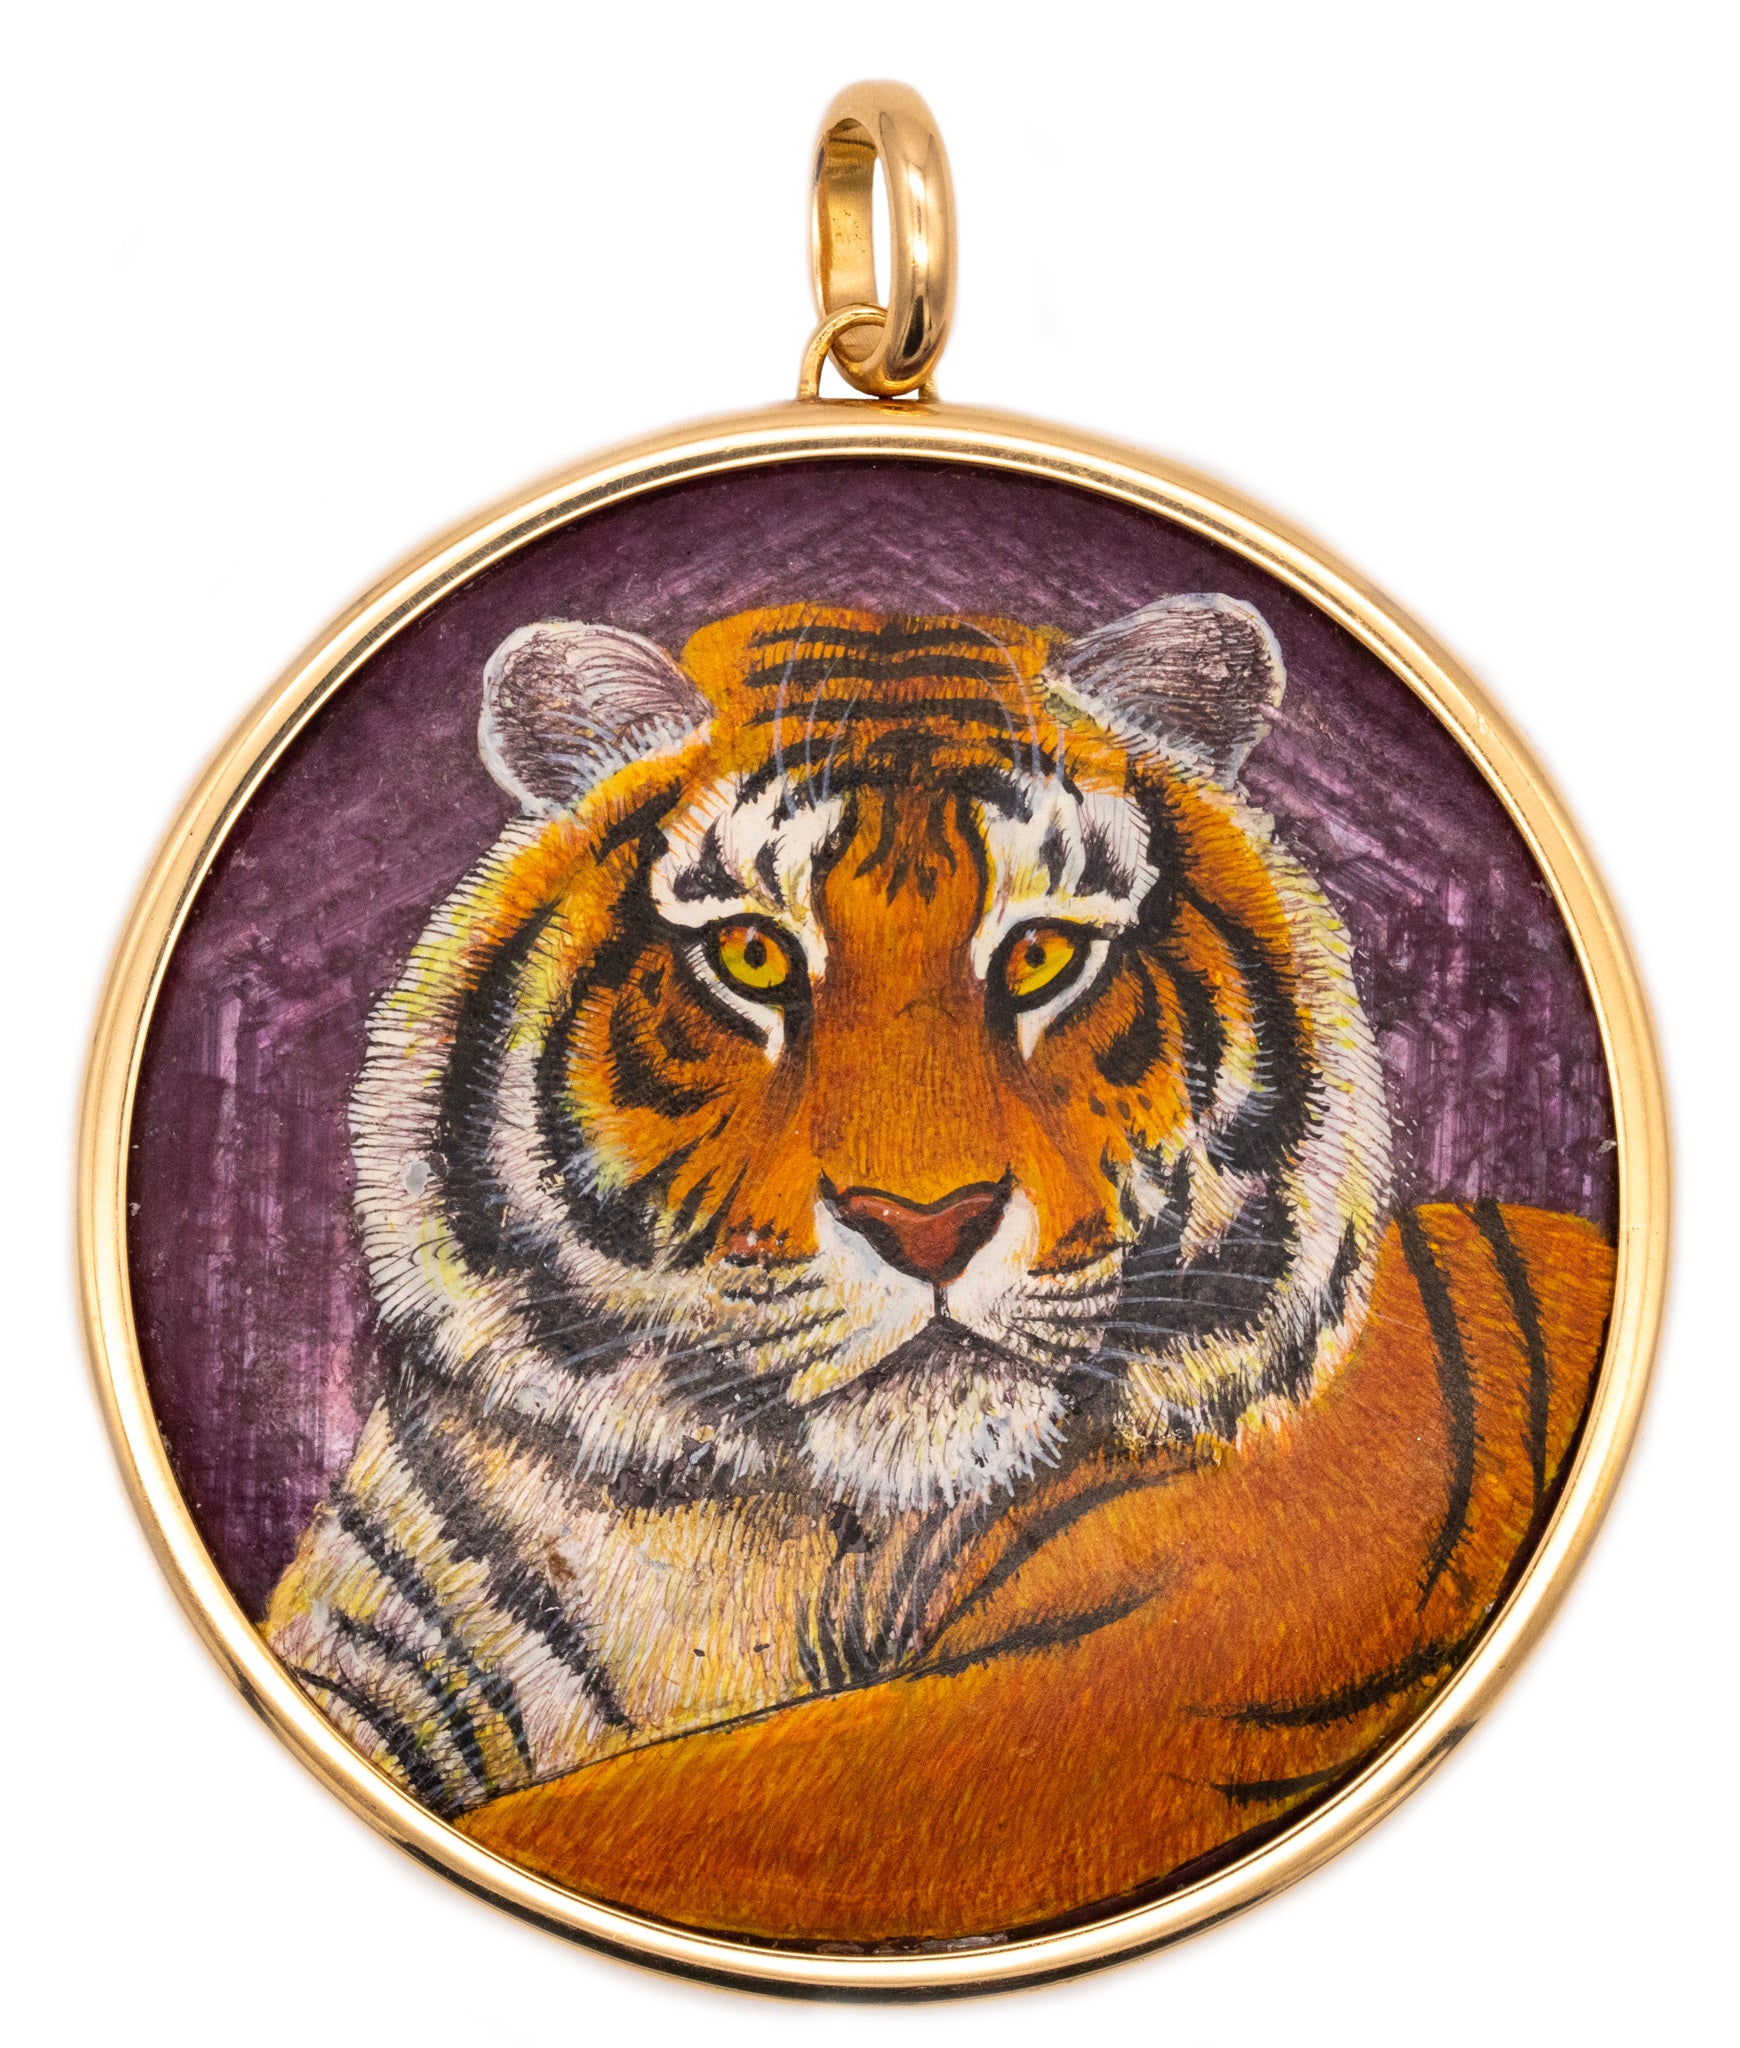 MICHELE DELLA VALLE 18 KT YELLOW GOLD PENDANT WITH A TIGER ON RED RUBY